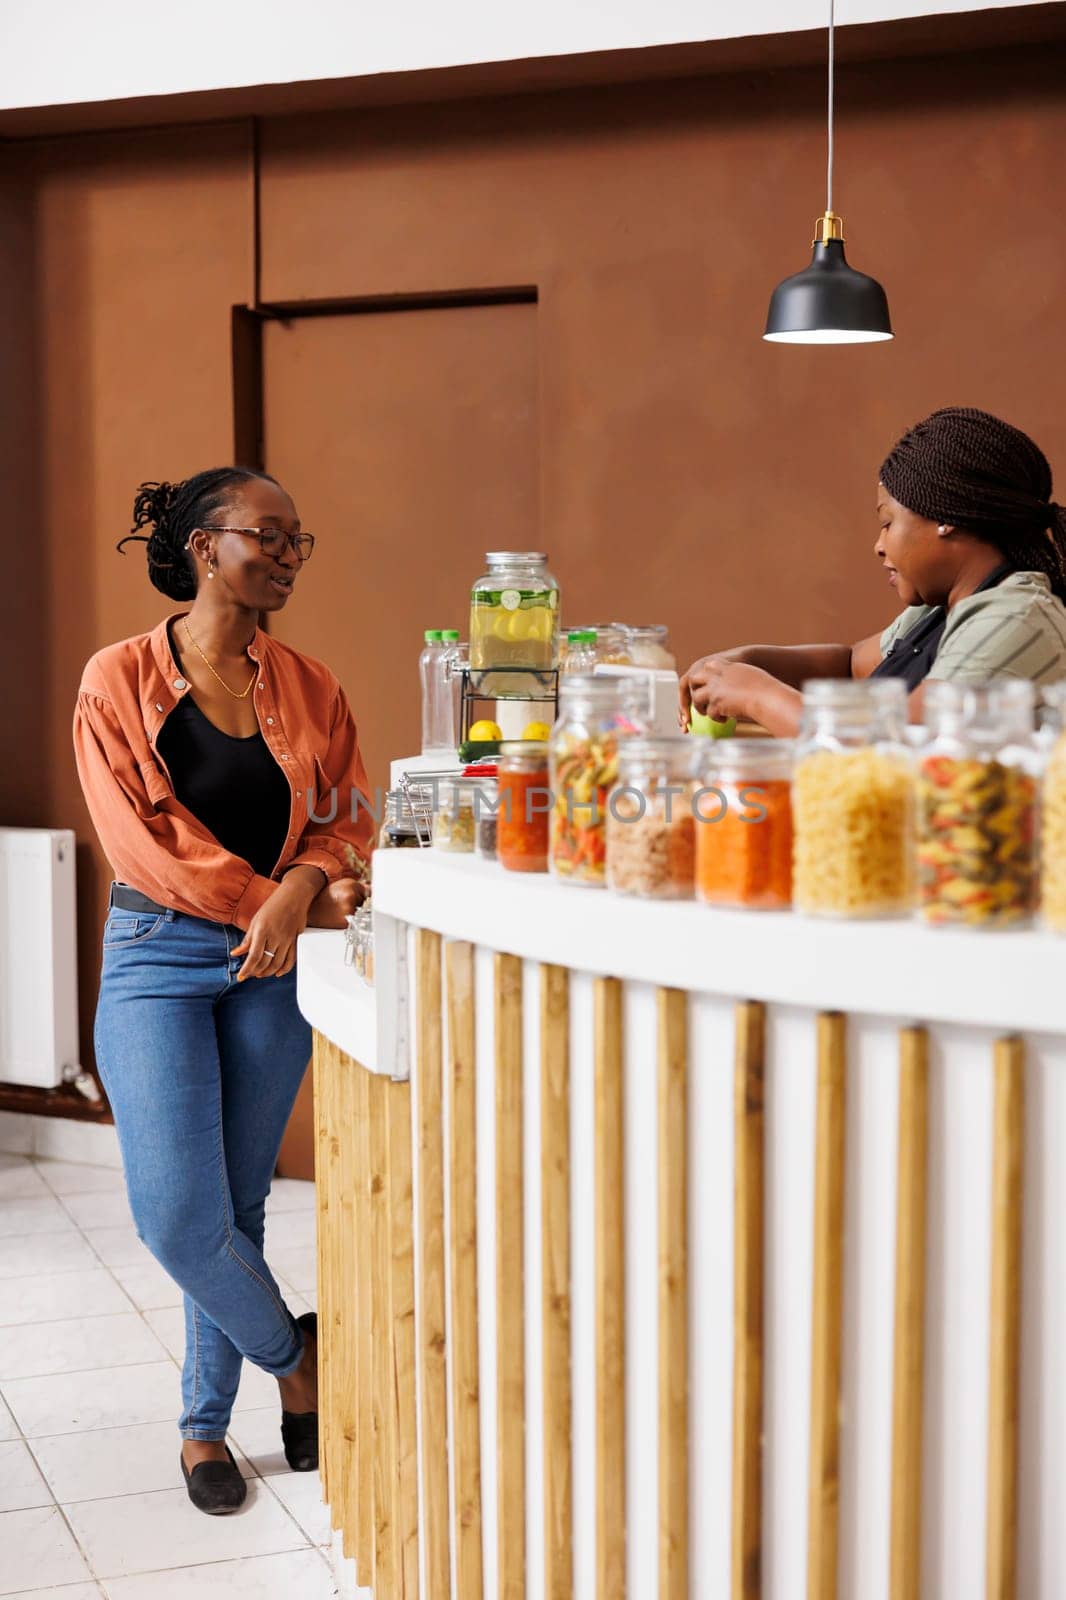 African American vendor checks out groceries at a local market offering eco-friendly, organic products. Black women at cashier desk conversing about locally grown nutritious organic products.